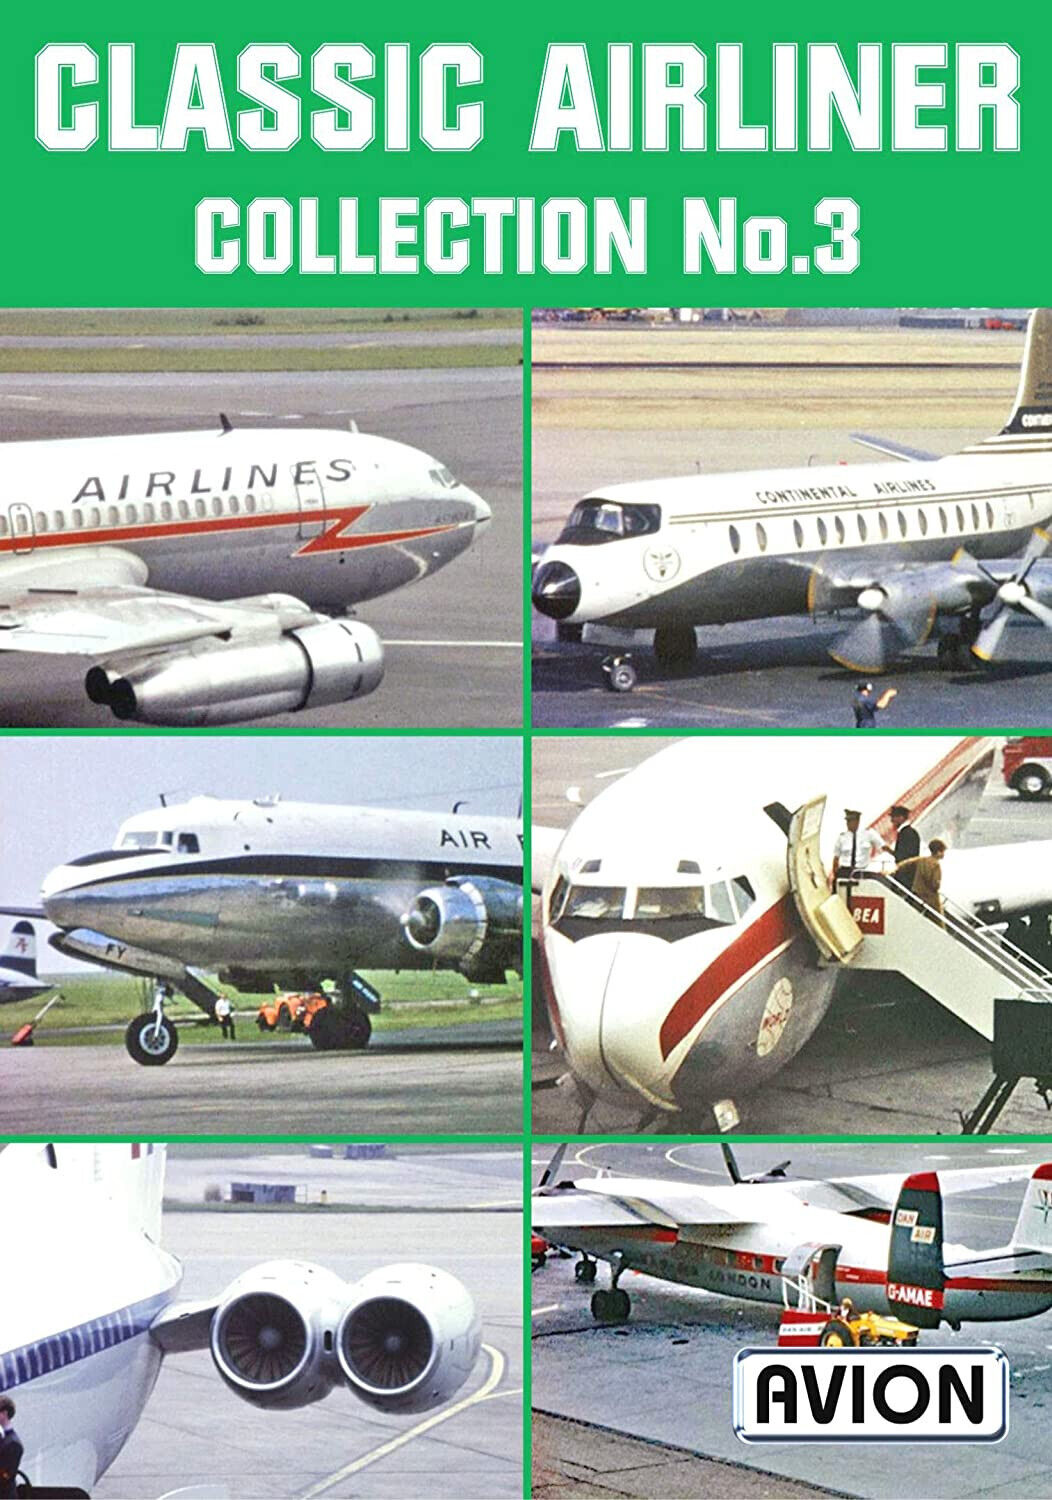 CLASSIC AIRLINER COLLECTION NO. 3 AVION DVD VIDEO NTSC *NEW IN OPEN PACKAGE*